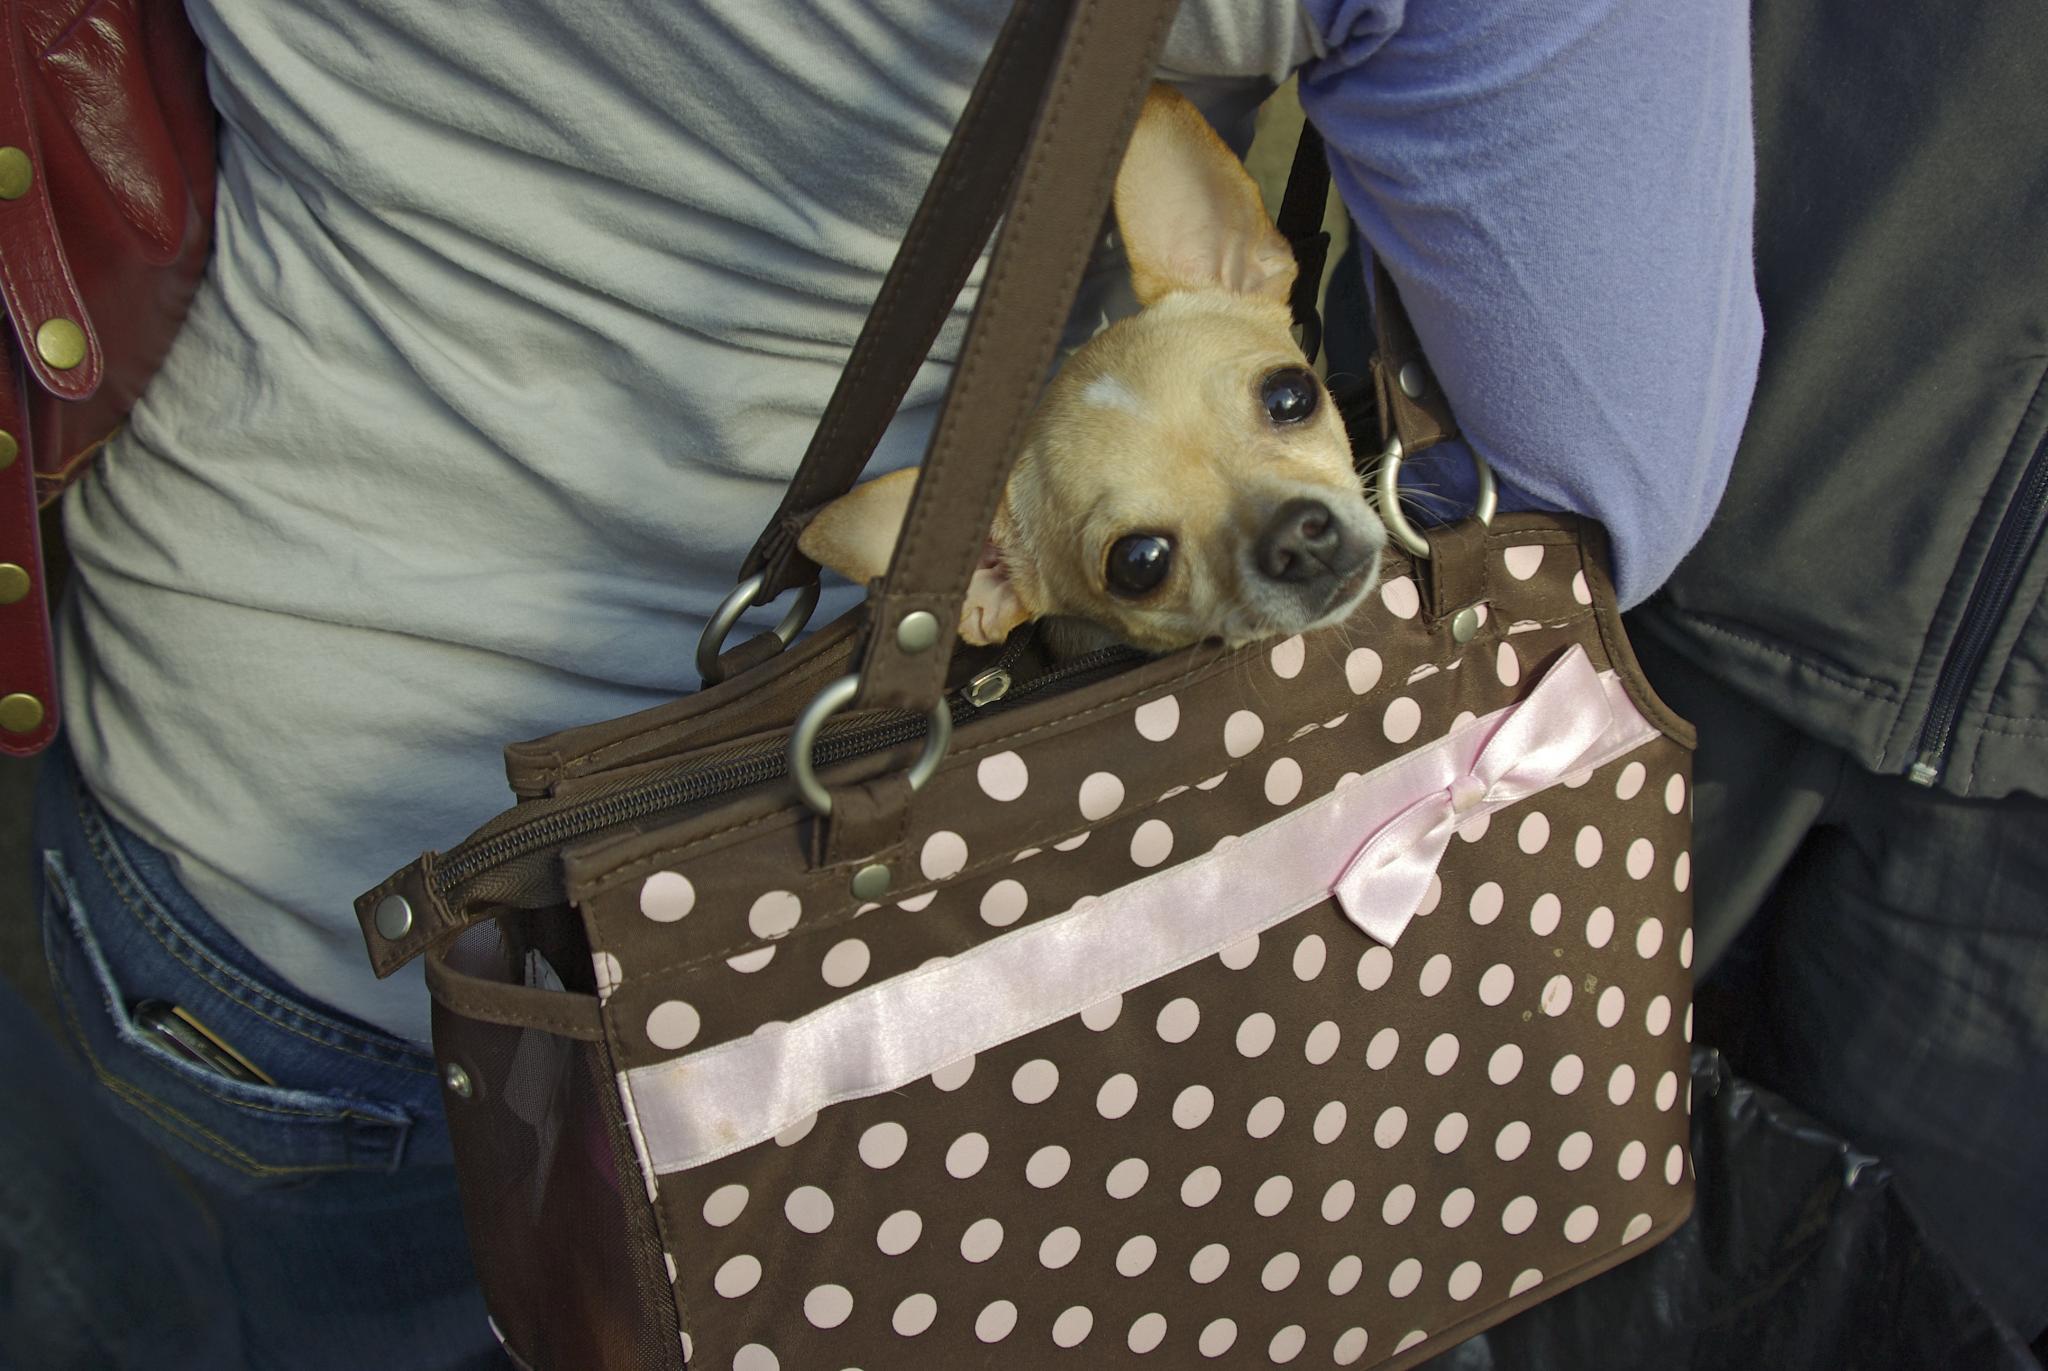 Are any international airlines flying into Chiang Mai regularly now?-abita_stage_purse_chihuahua-jpg